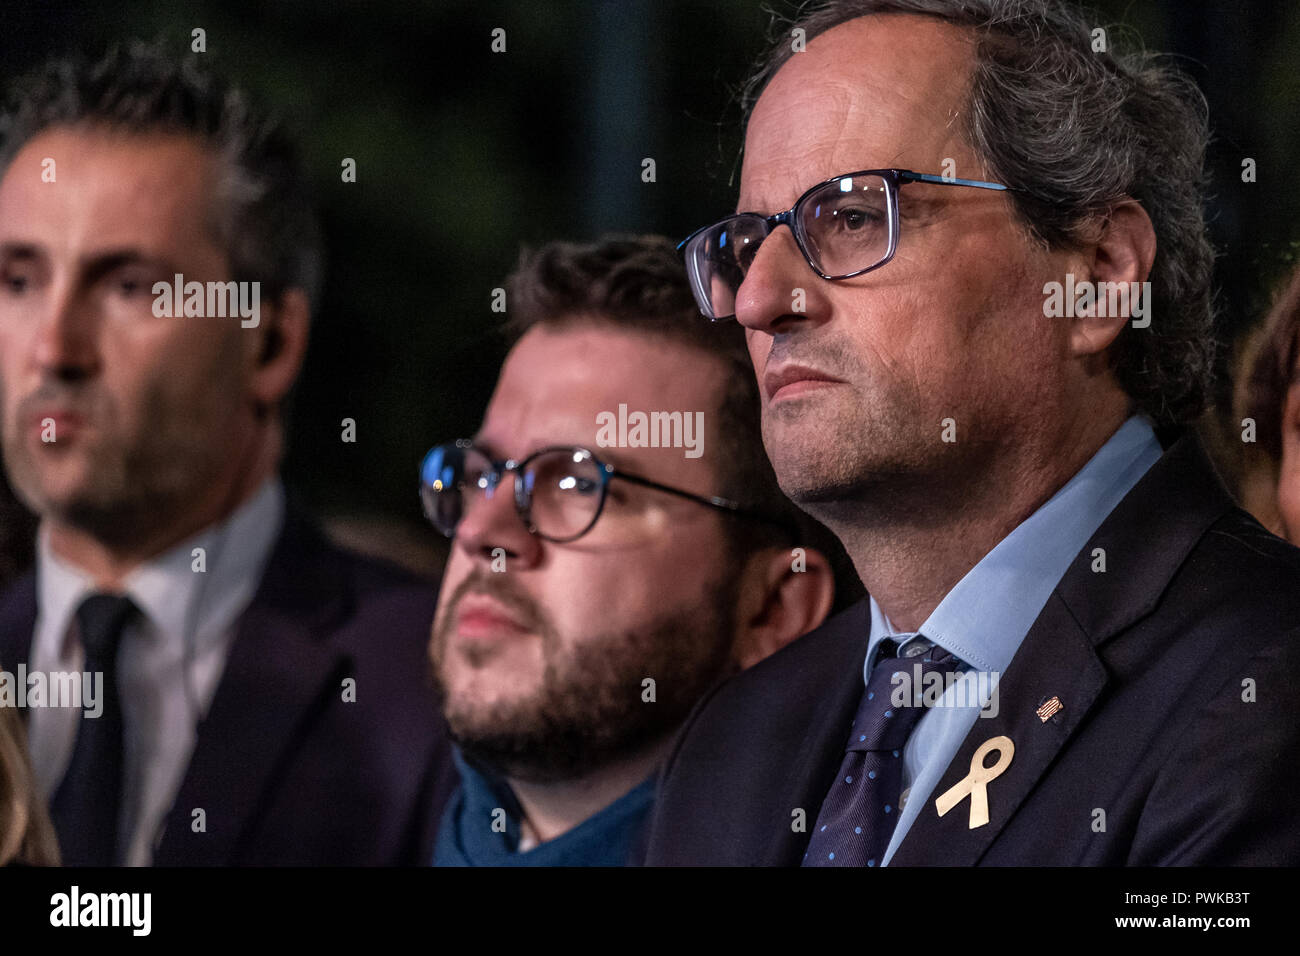 The President of the Generalitat de Catalunya, Quim Torra, is seen during the protest. Thousands of people protest demanding for the freedom of Jordi Cuixart and Jordi Sànchez, 'los Jordis' after 1 year in prison, under the motto a year of shame, a year of dignity, they will not stop us. Stock Photo